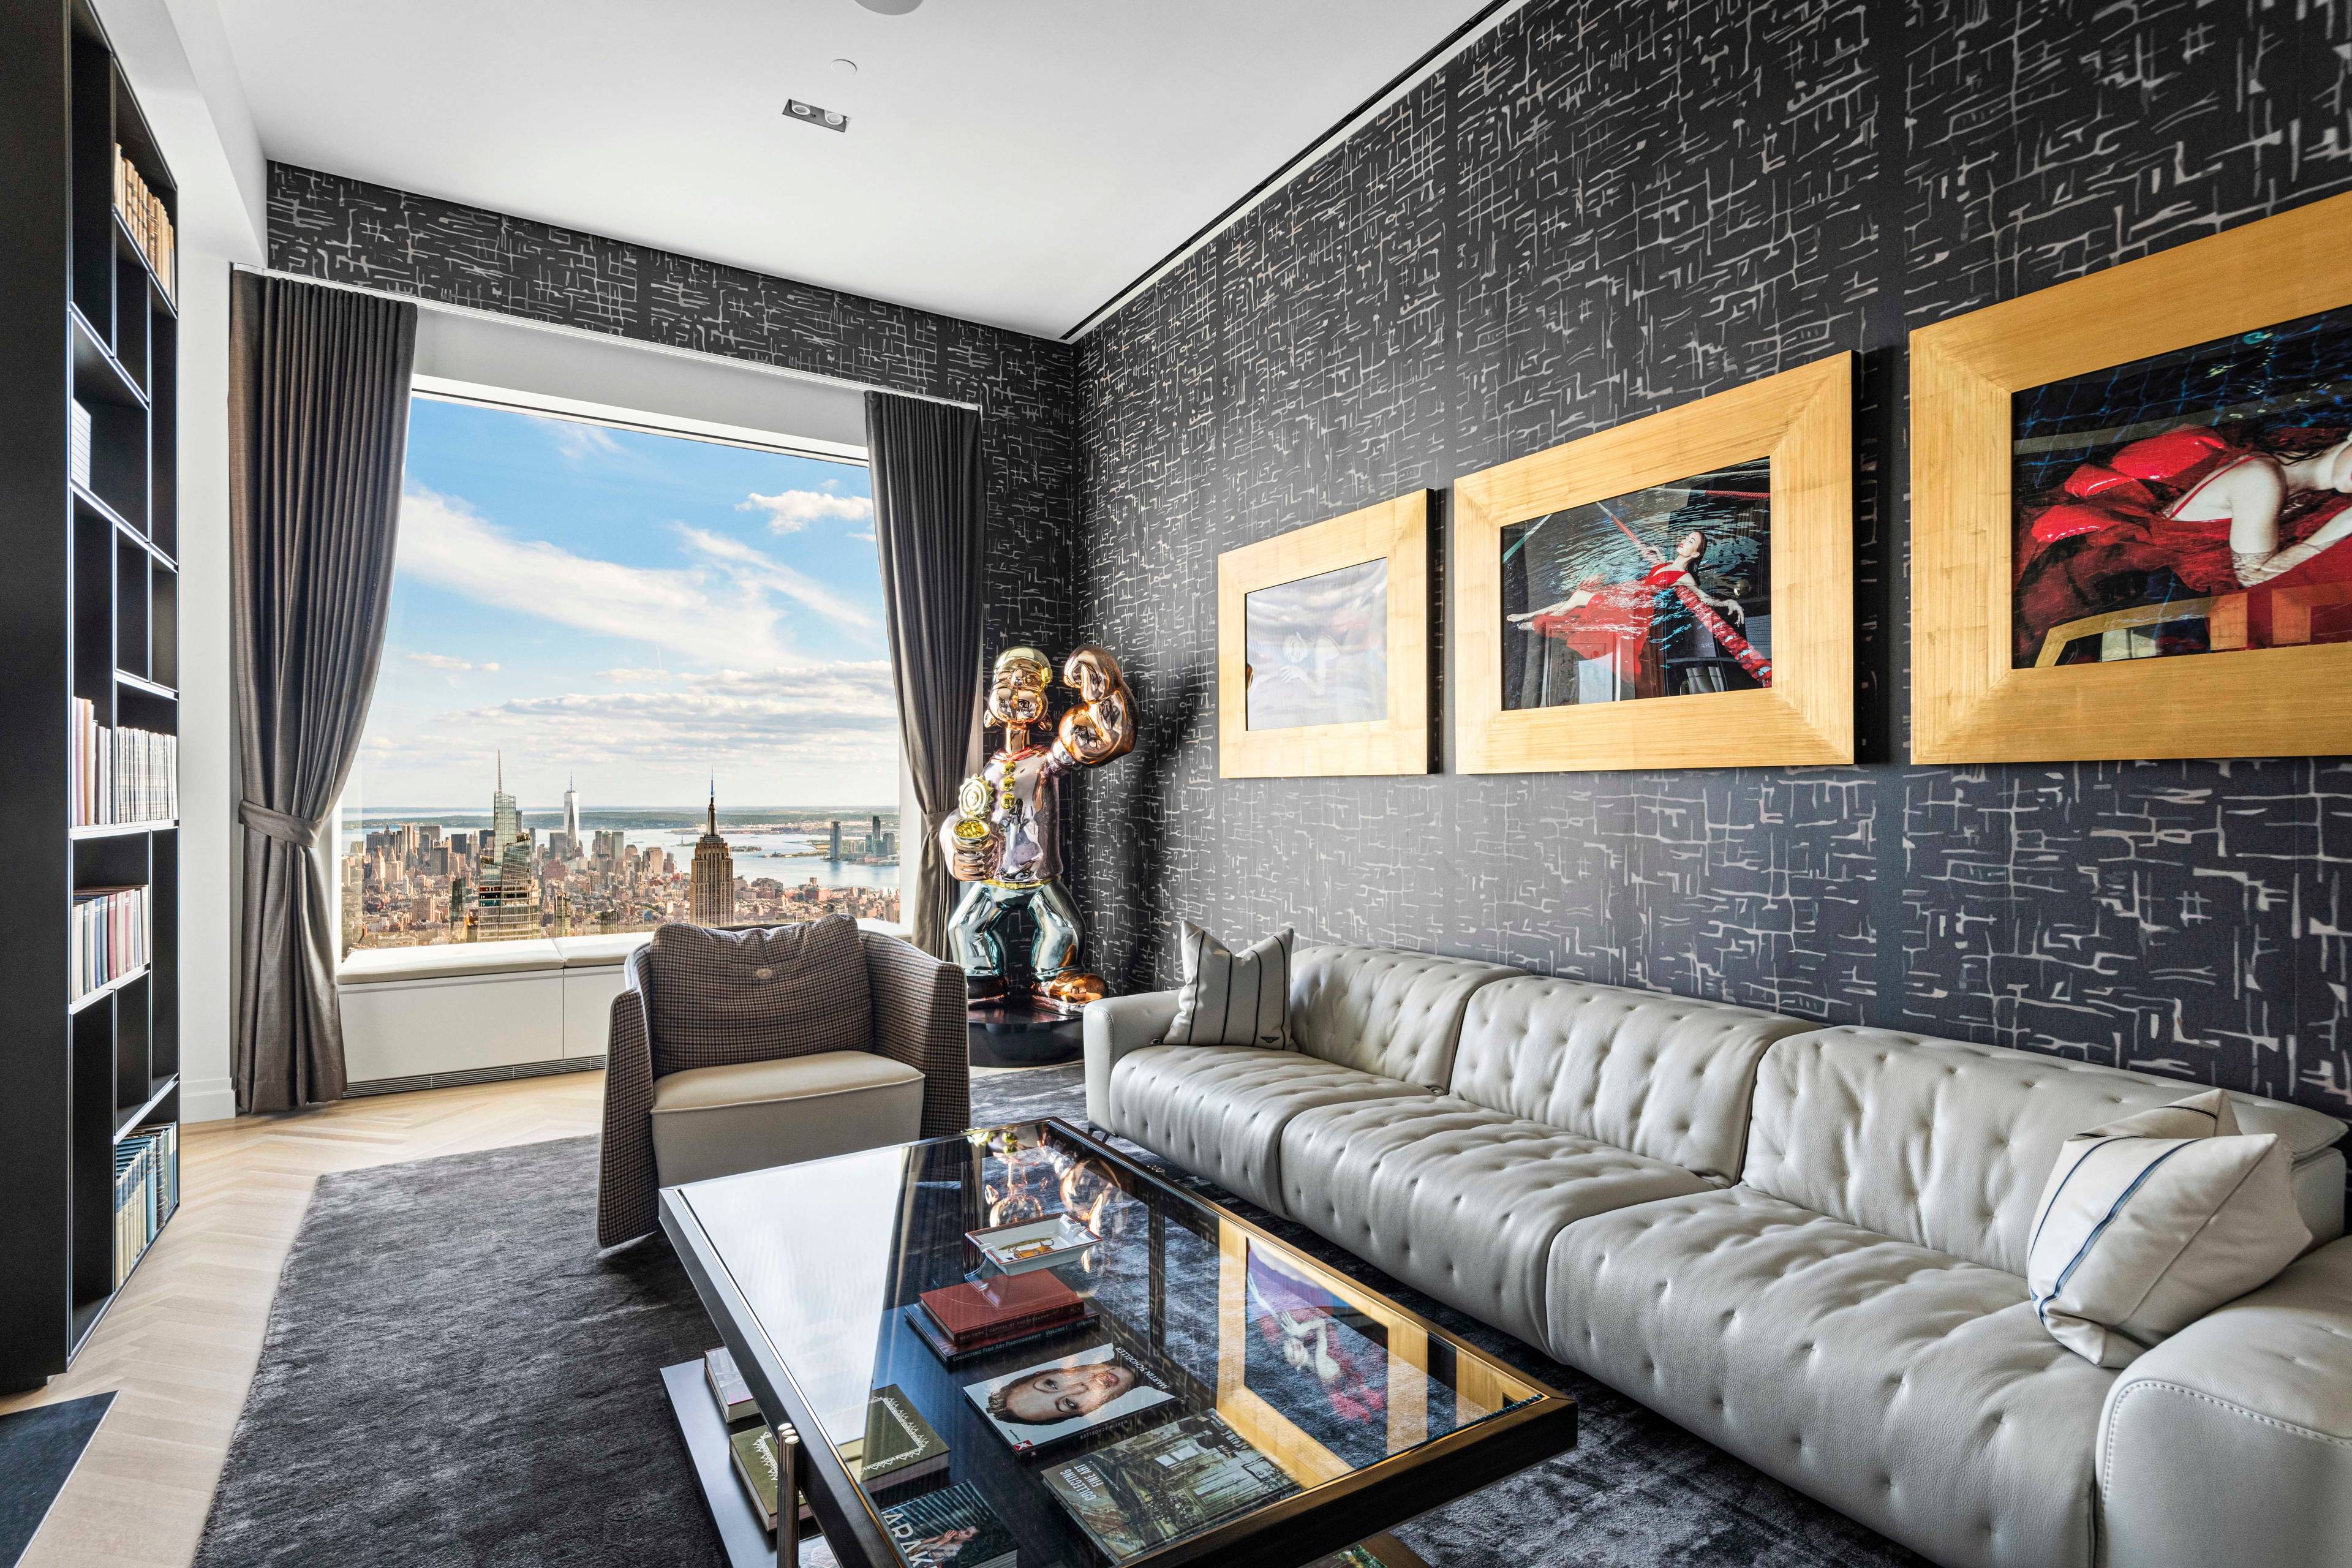 The penthouse at 432 Park Avenue, one of the most iconic residences of our time, takes its premier place above every other trophy penthouse in New York.